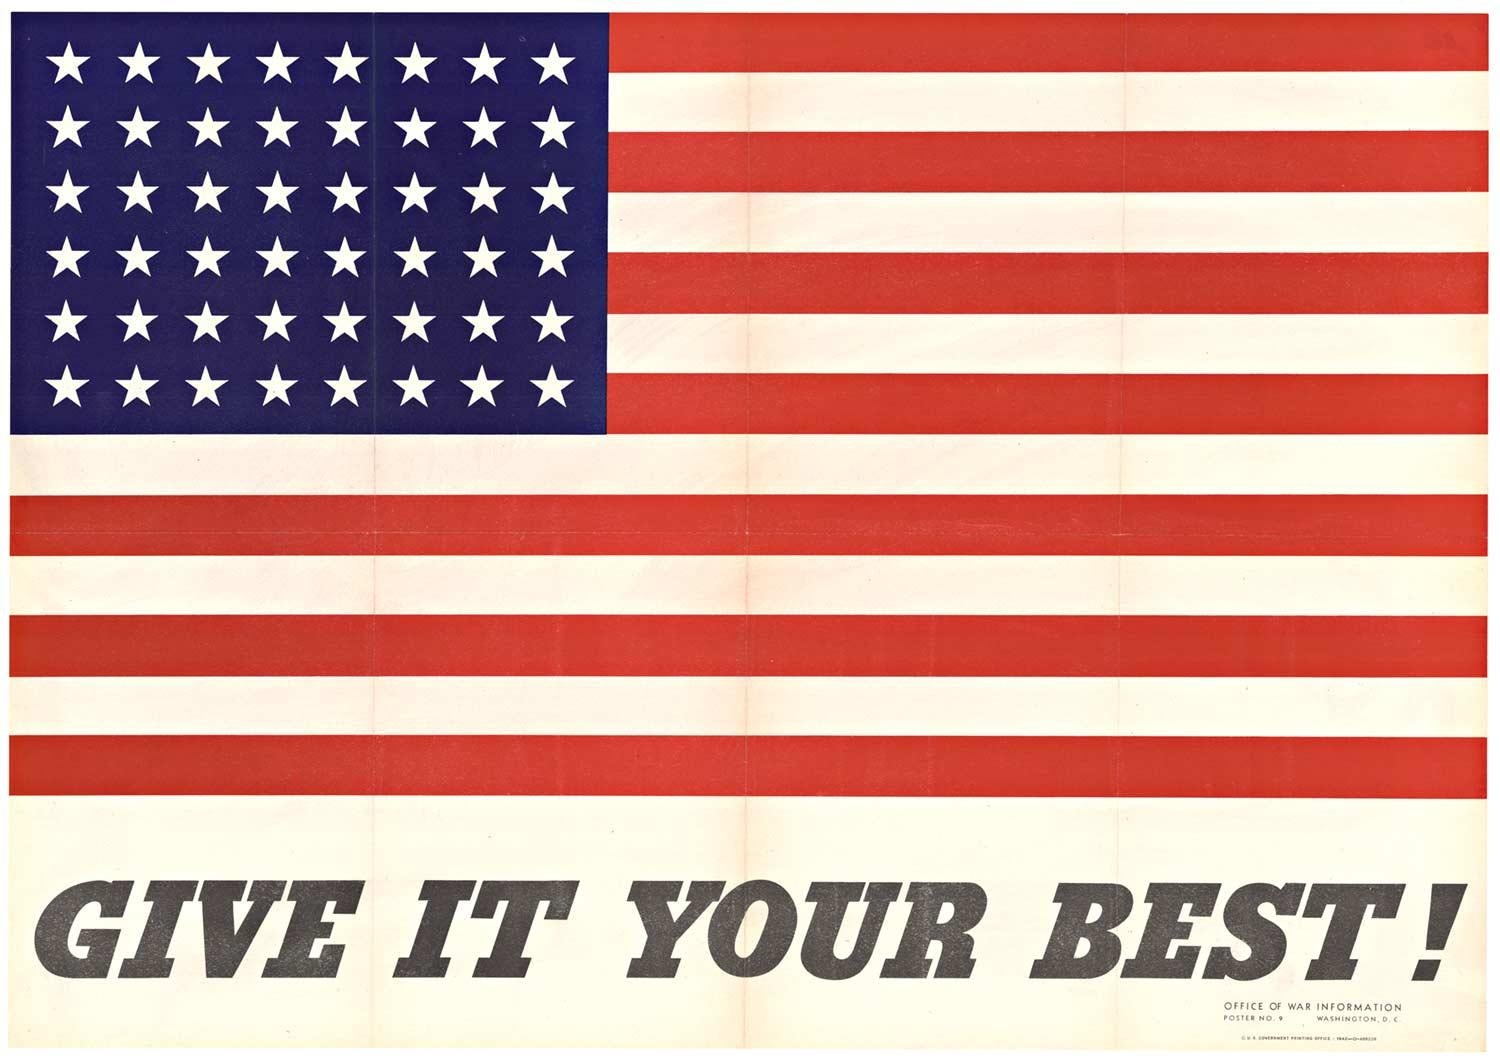 Charles Coiner Print - Original "Give It Your Best"  American Flag - 48 stars -  vintage poster